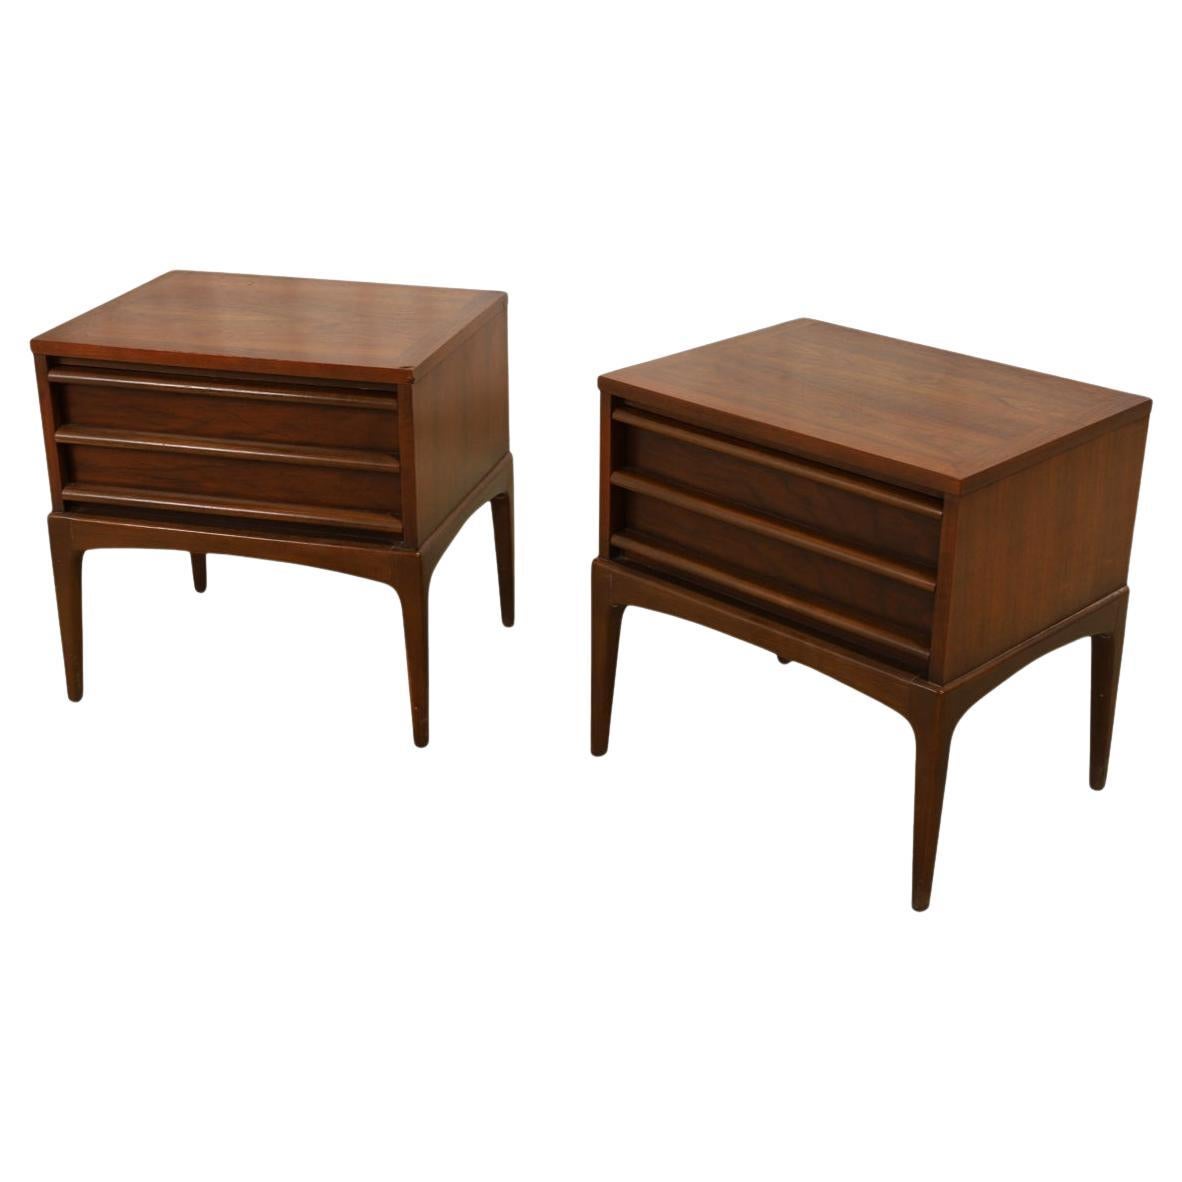 Pair Mid century rhythm Lane walnut 2 drawer  nightstands. Designed and manufactured by Lane in Alta Vista VA. Walnut solid oak drawer construction with carved handle pulls. Very well built and beautiful pair of matching bedside or end tables or